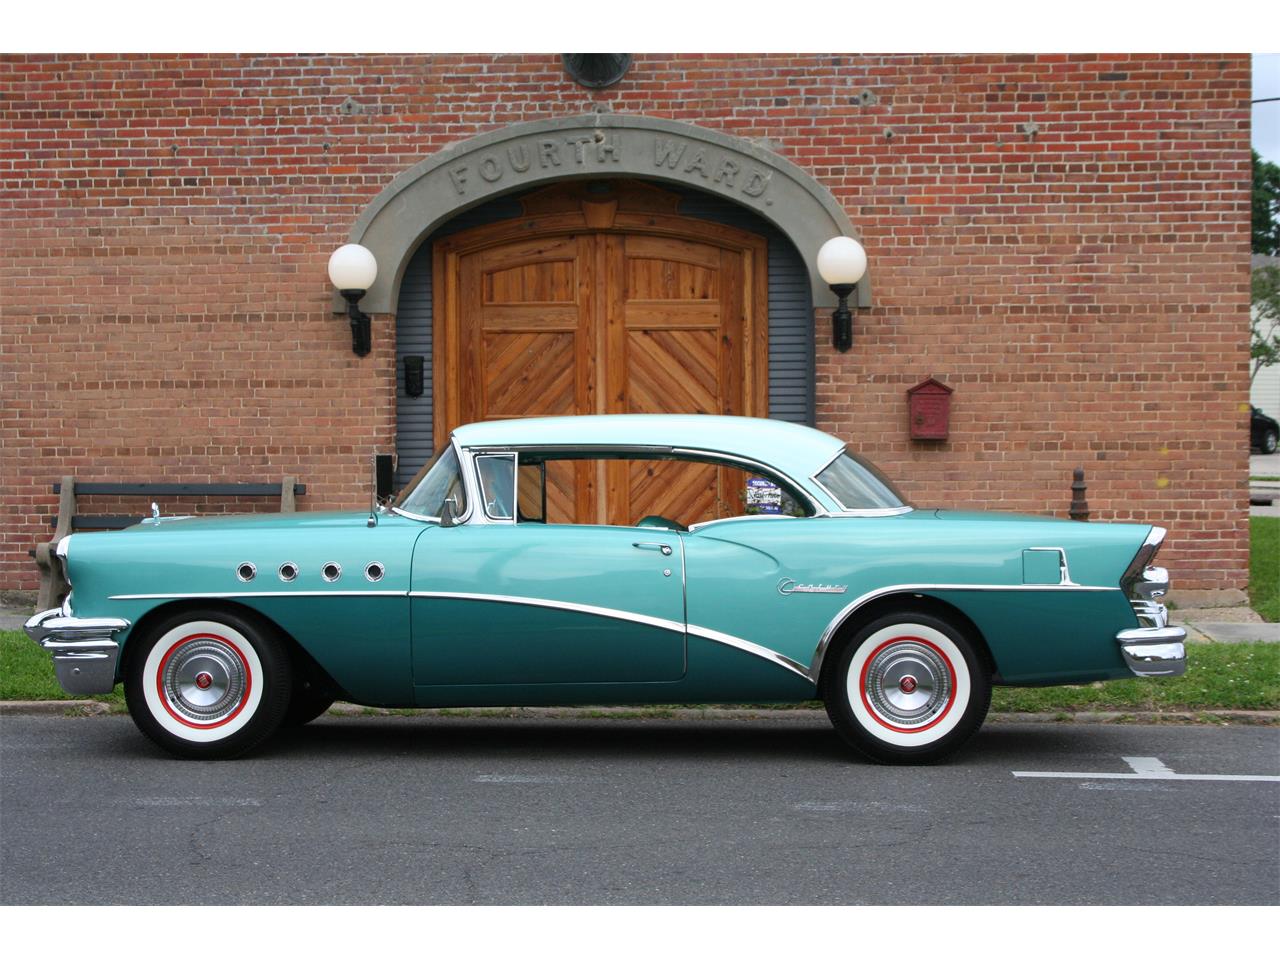 1955 buick century for sale classiccars com cc 1193025 1955 buick century for sale